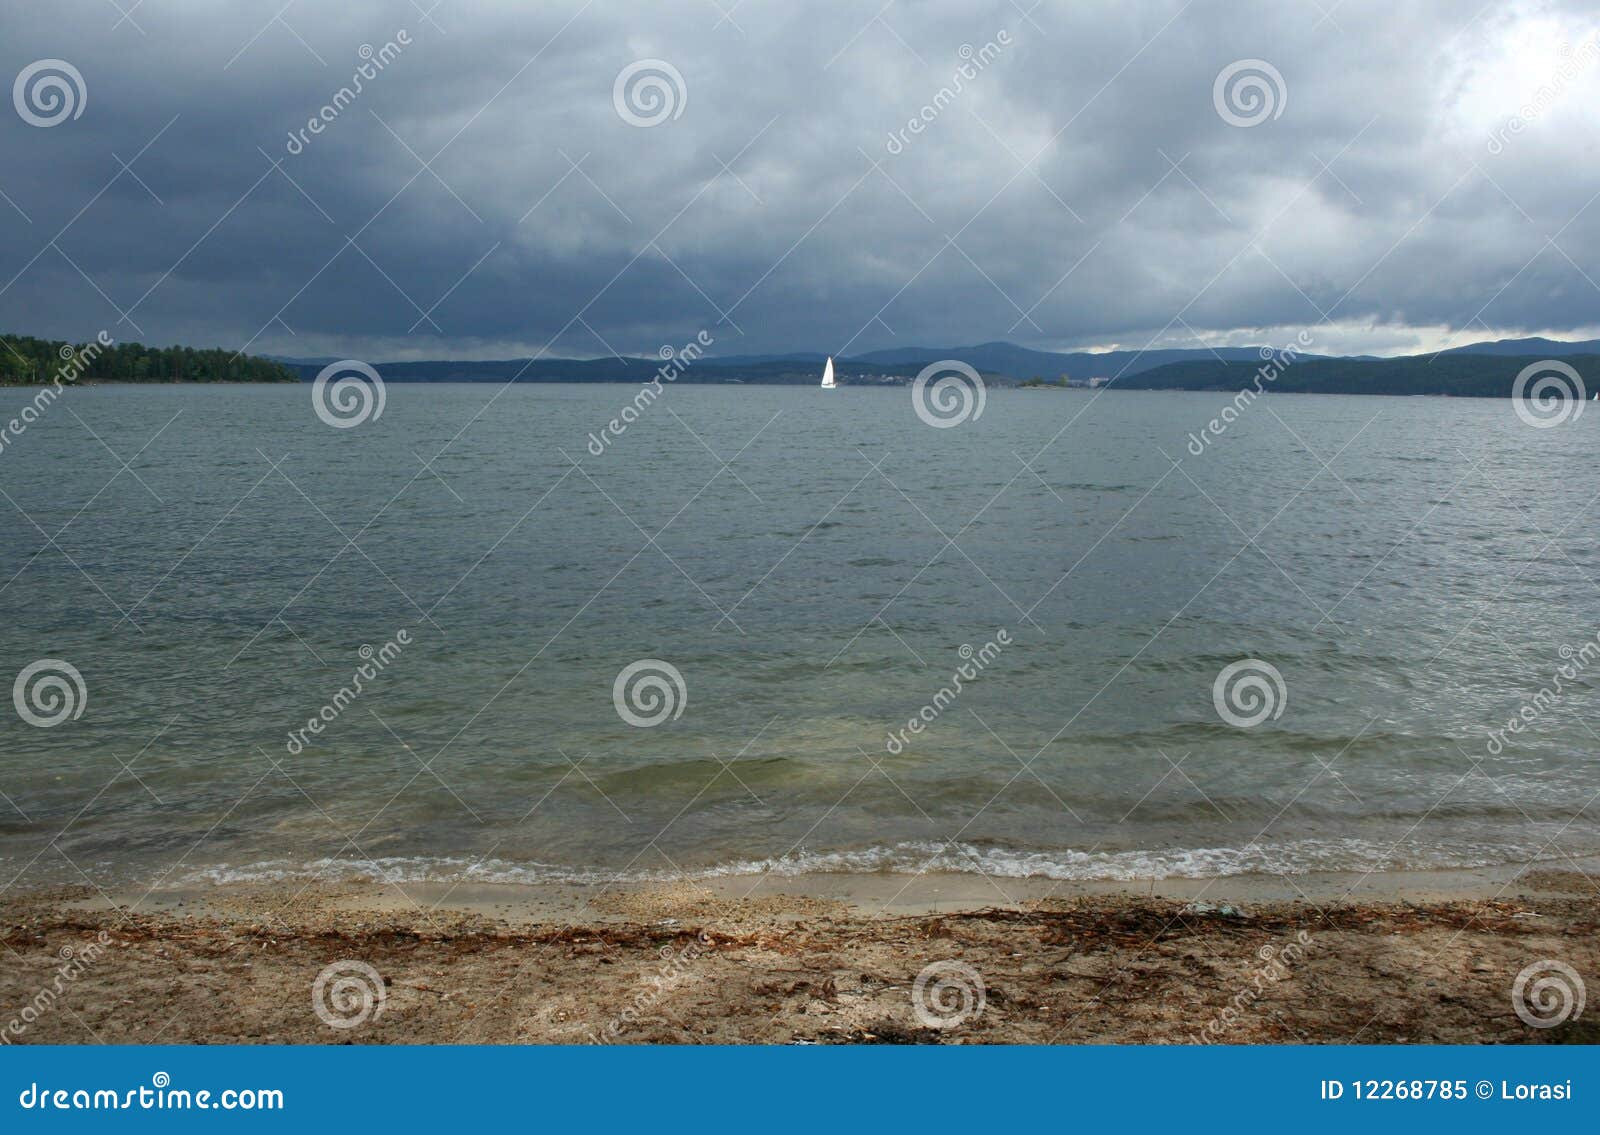 Beautiful lake and yaht on the background of dark cloudy sky